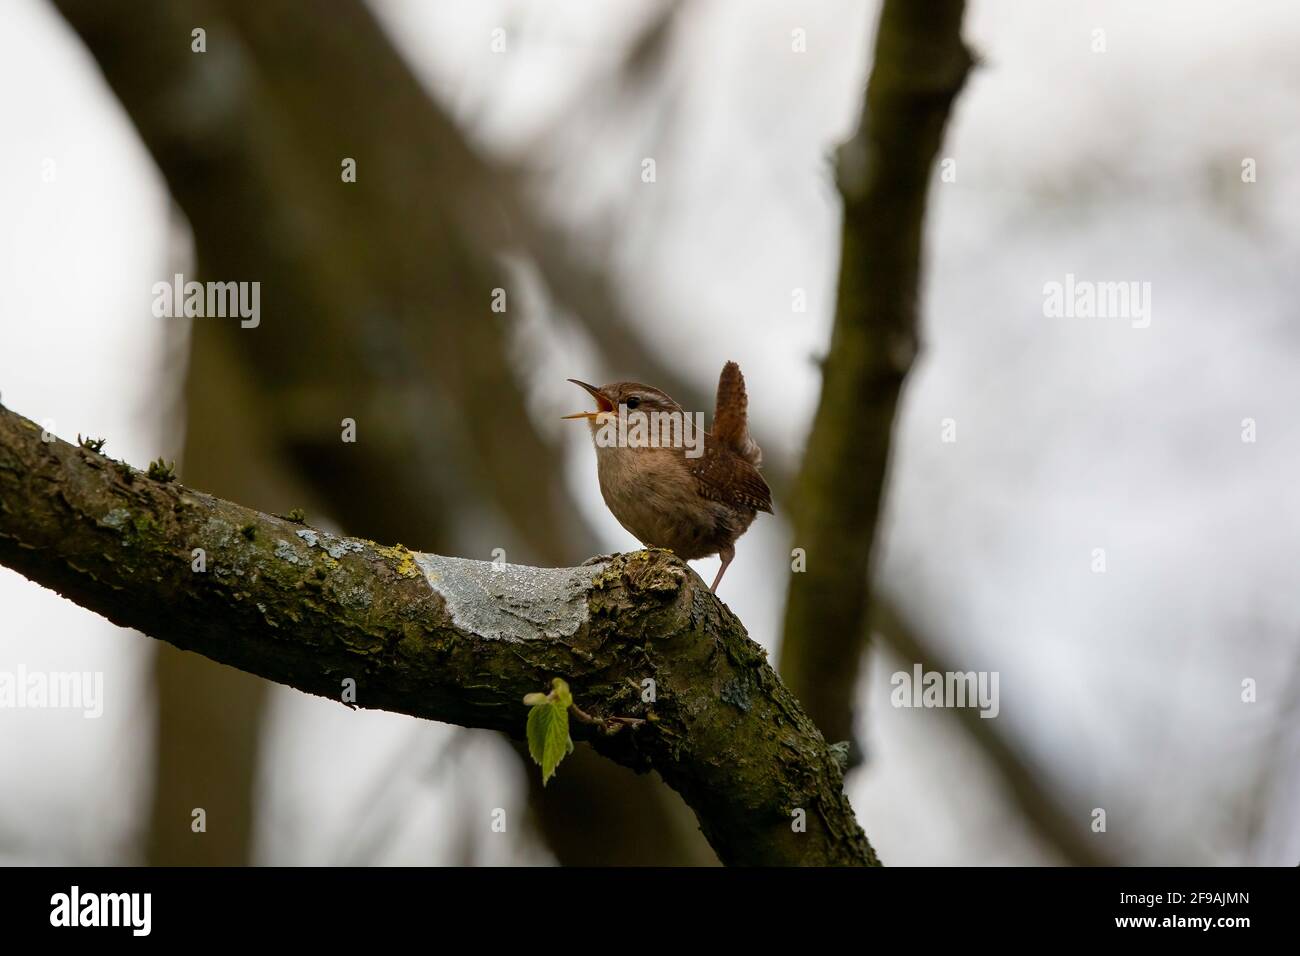 A Wren bird signing from a branch of a tree Stock Photo